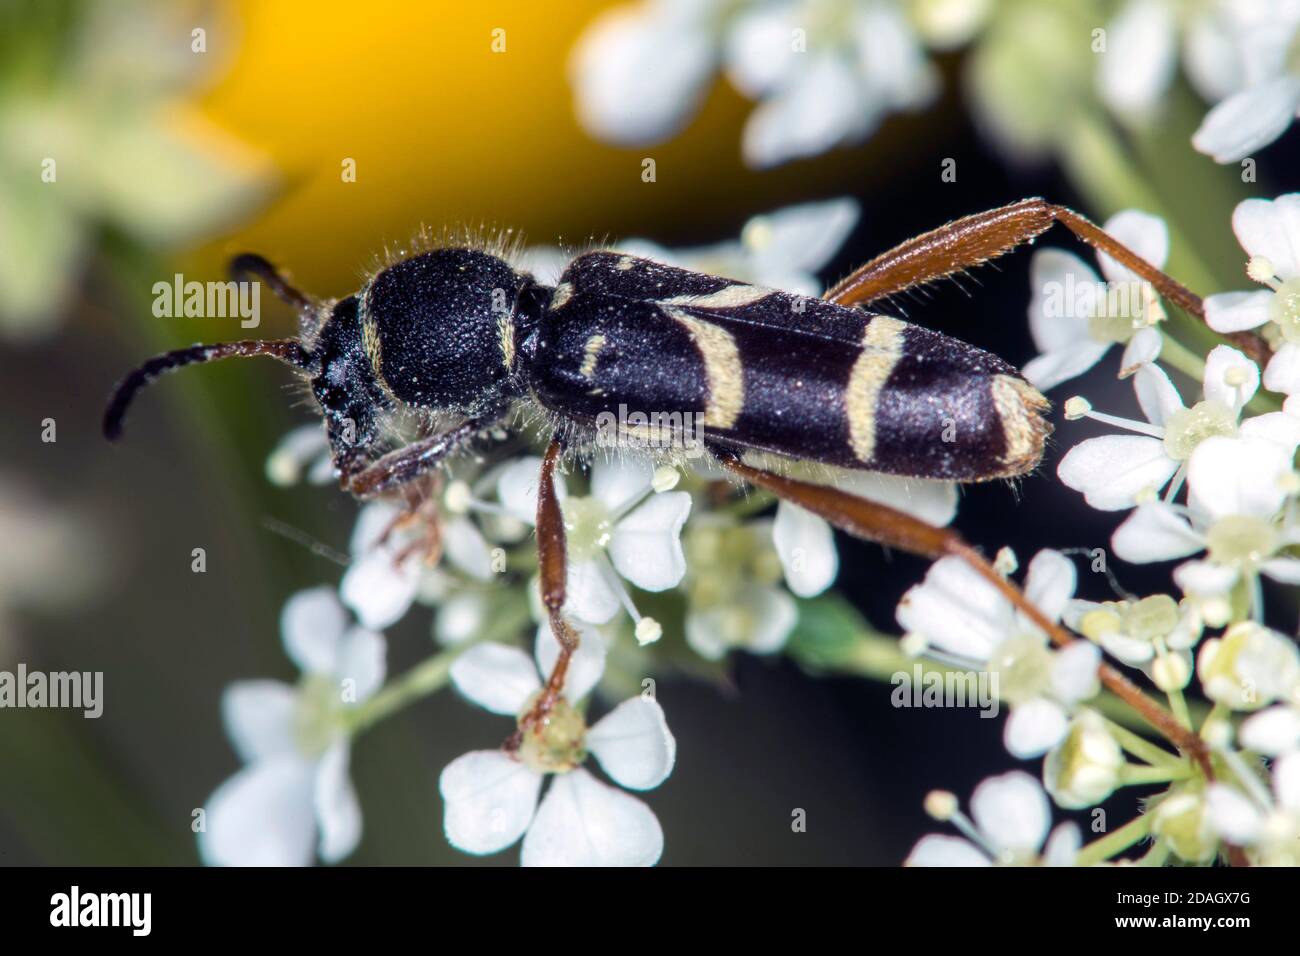 wasp beetle (Clytus arietis), on an inflorescense, Germany Stock Photo